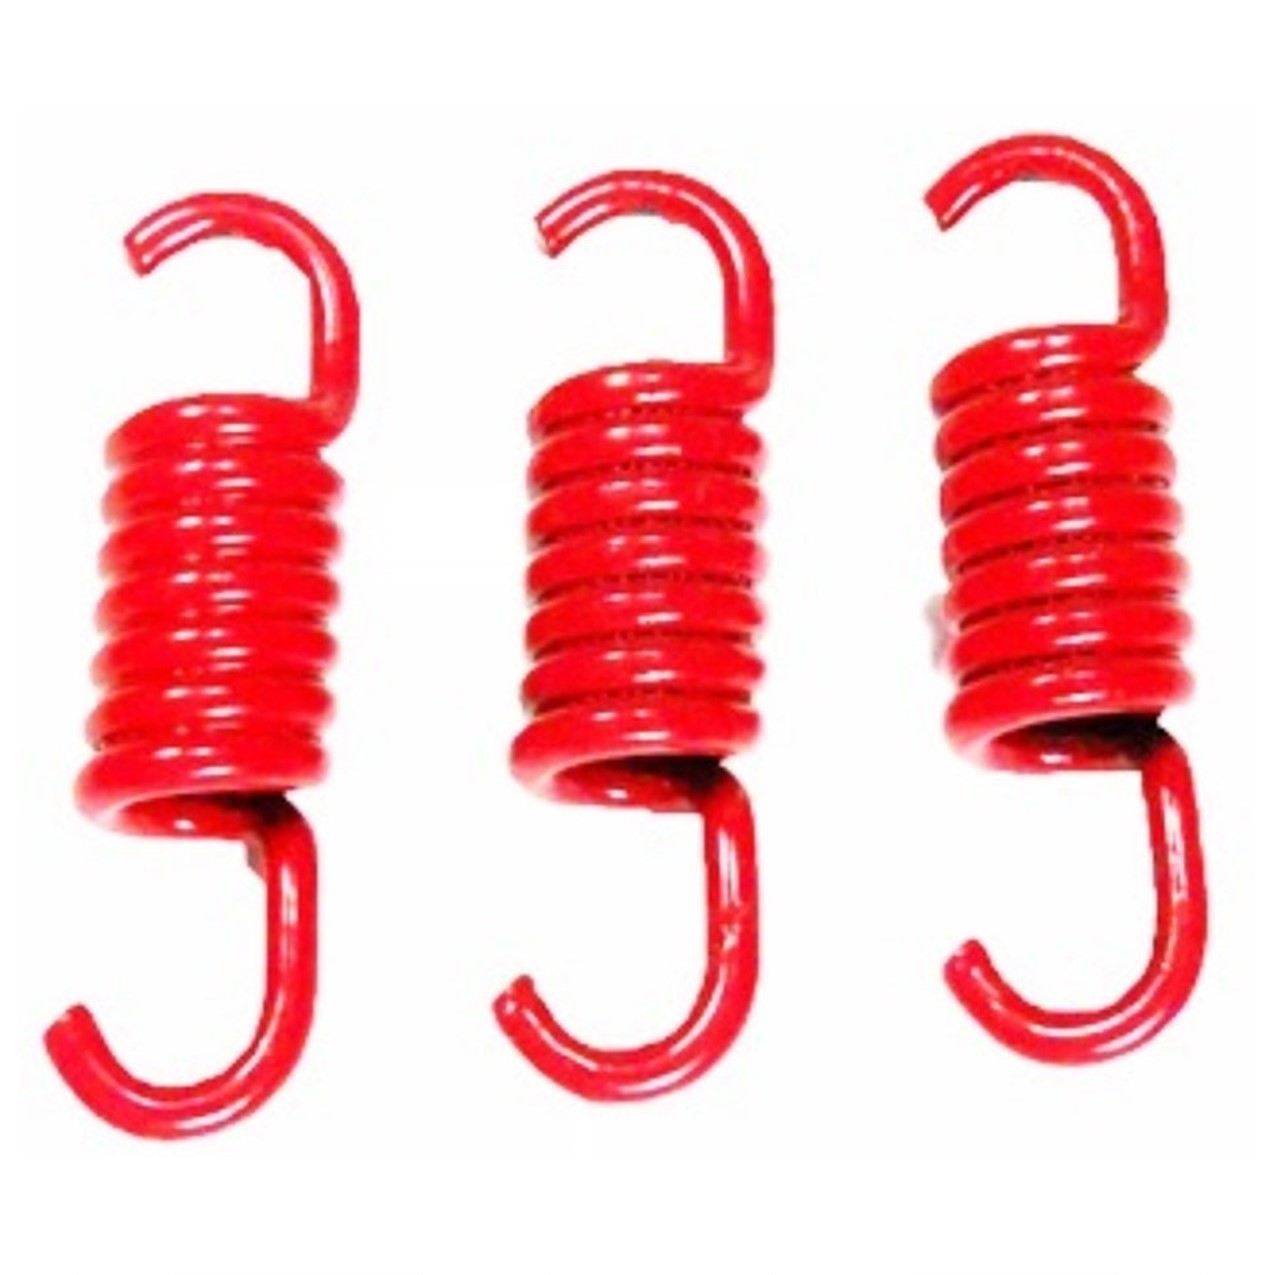 Clutch Spring Set HIGH PERFORMANCE Red +2000 RPM GY6-125, GY6-150 Chinese ATVs, GoKarts, Scooters - Click Image to Close